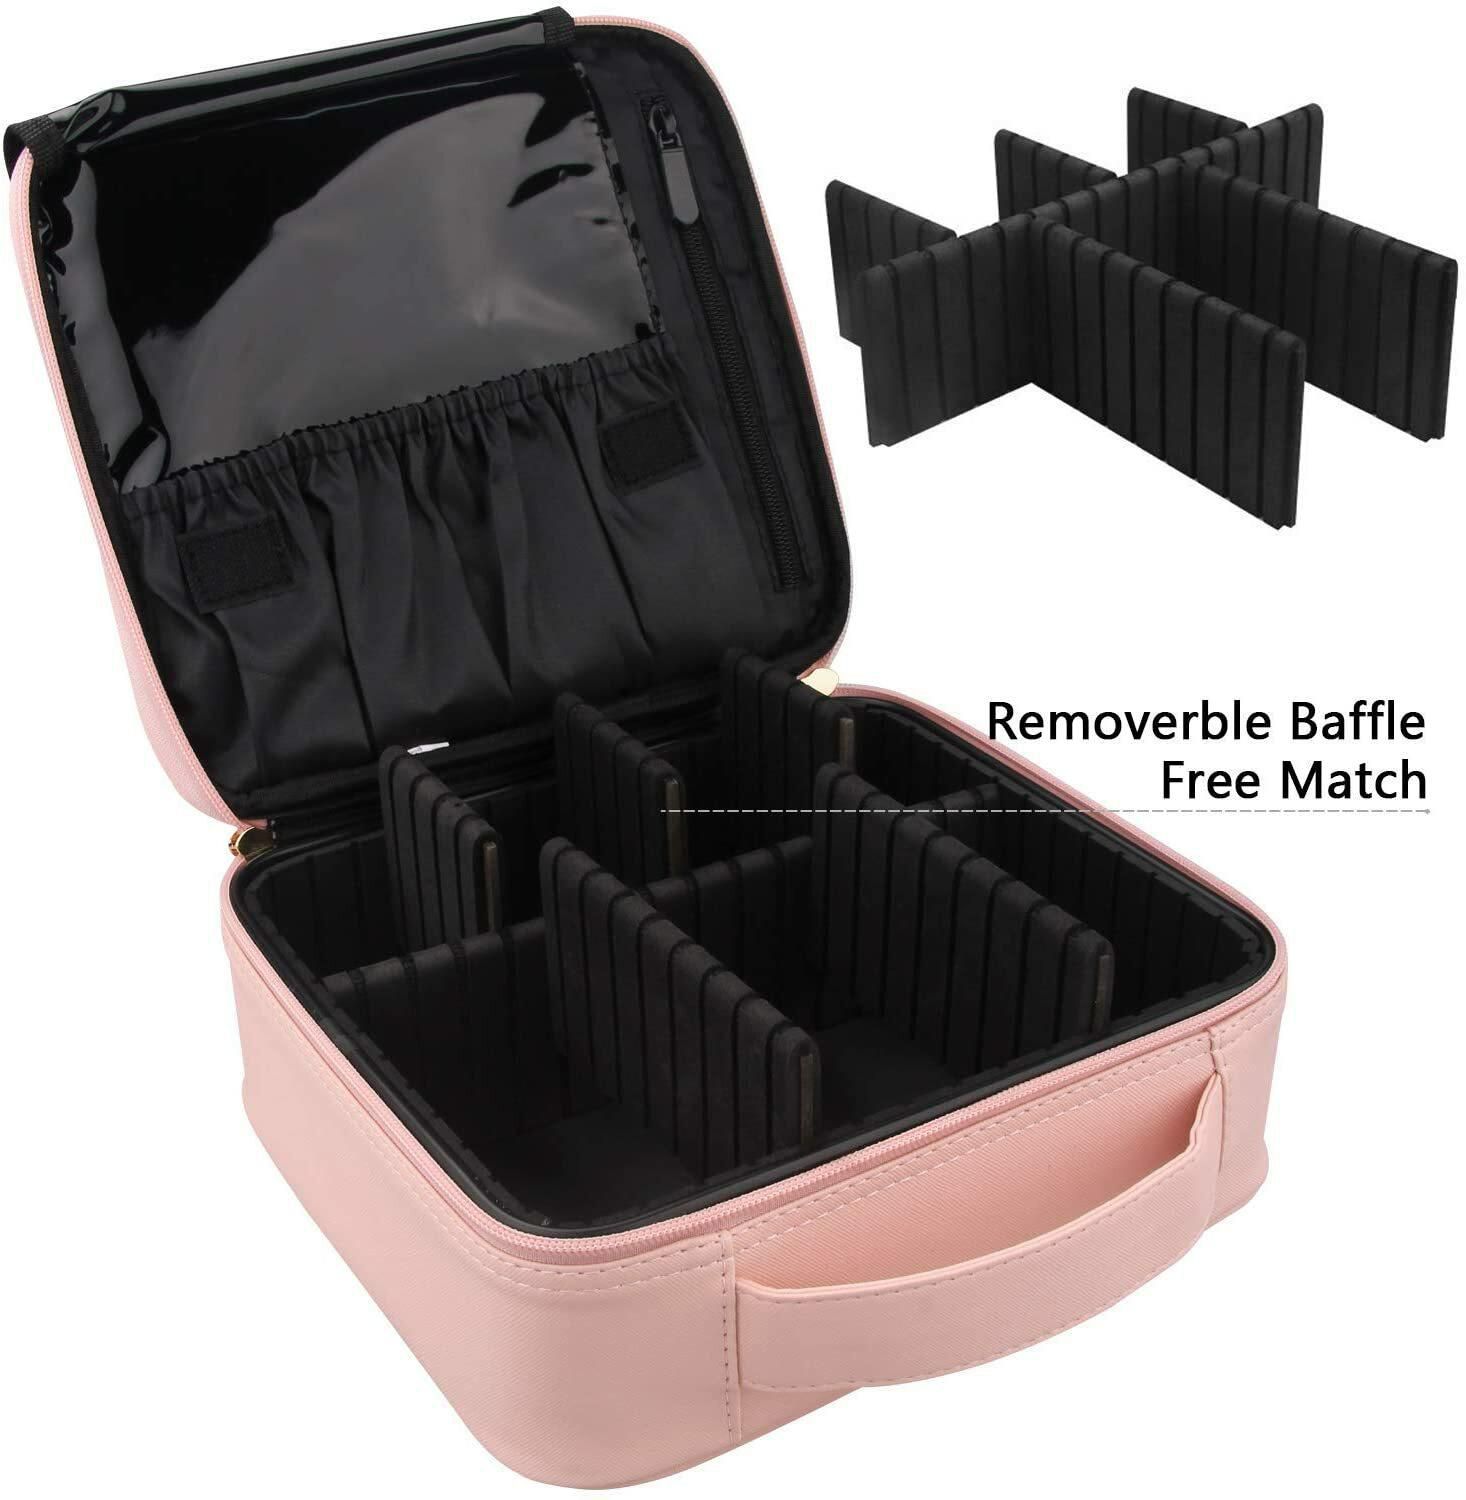 Generic Travel Makeup Train Case Cosmetic Organizer With Adjustable Dividers (Pink)